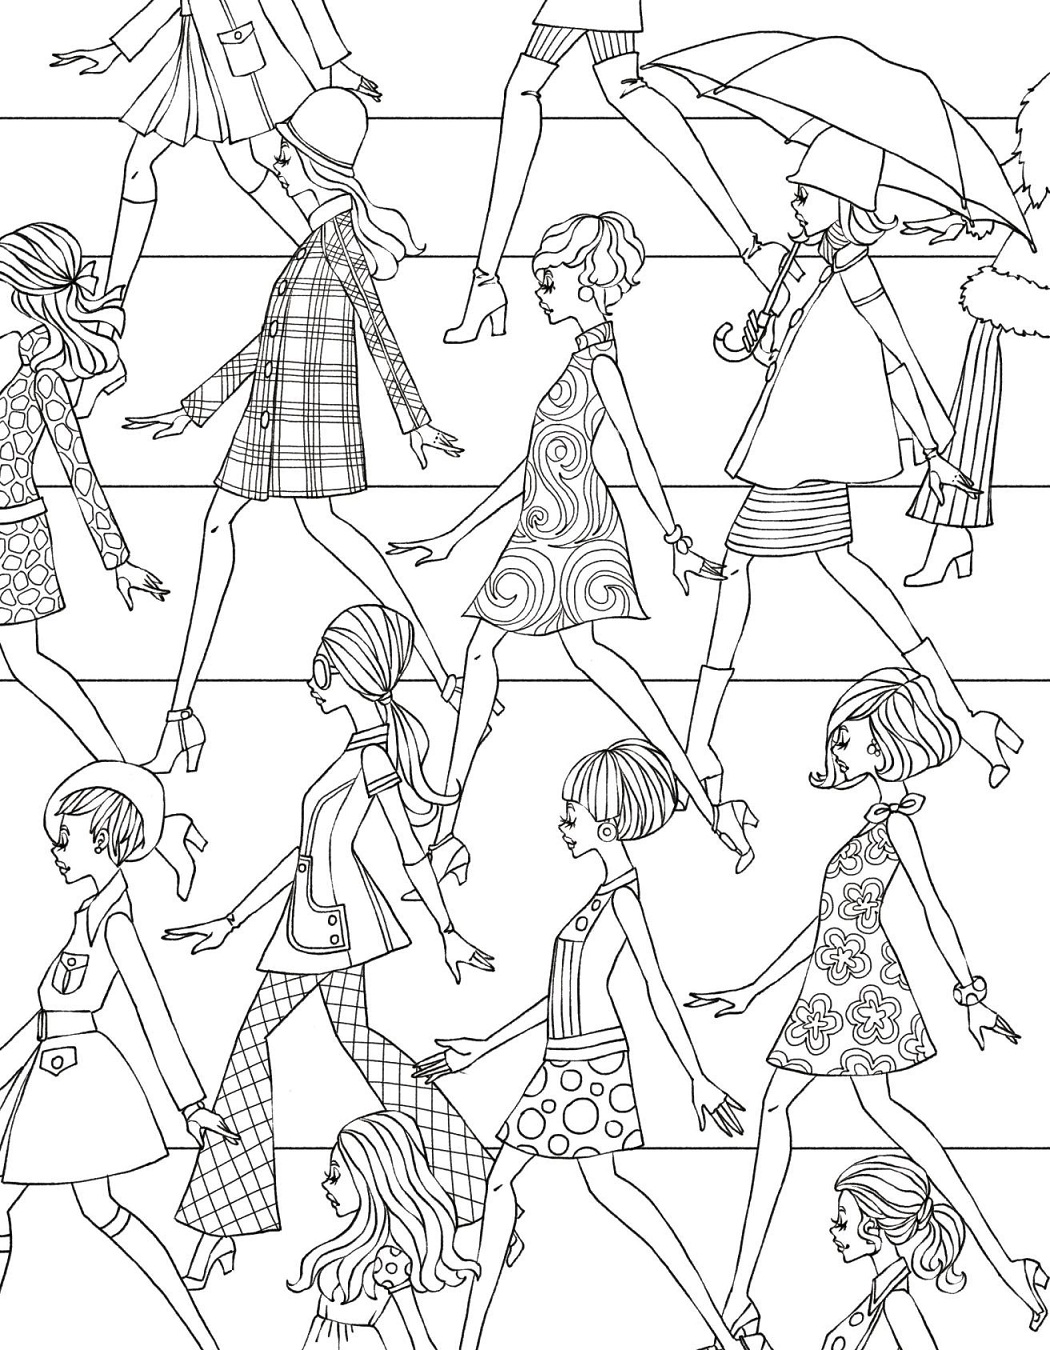 Teenagers On Street Coloring Page - Free Printable Coloring Pages for Kids